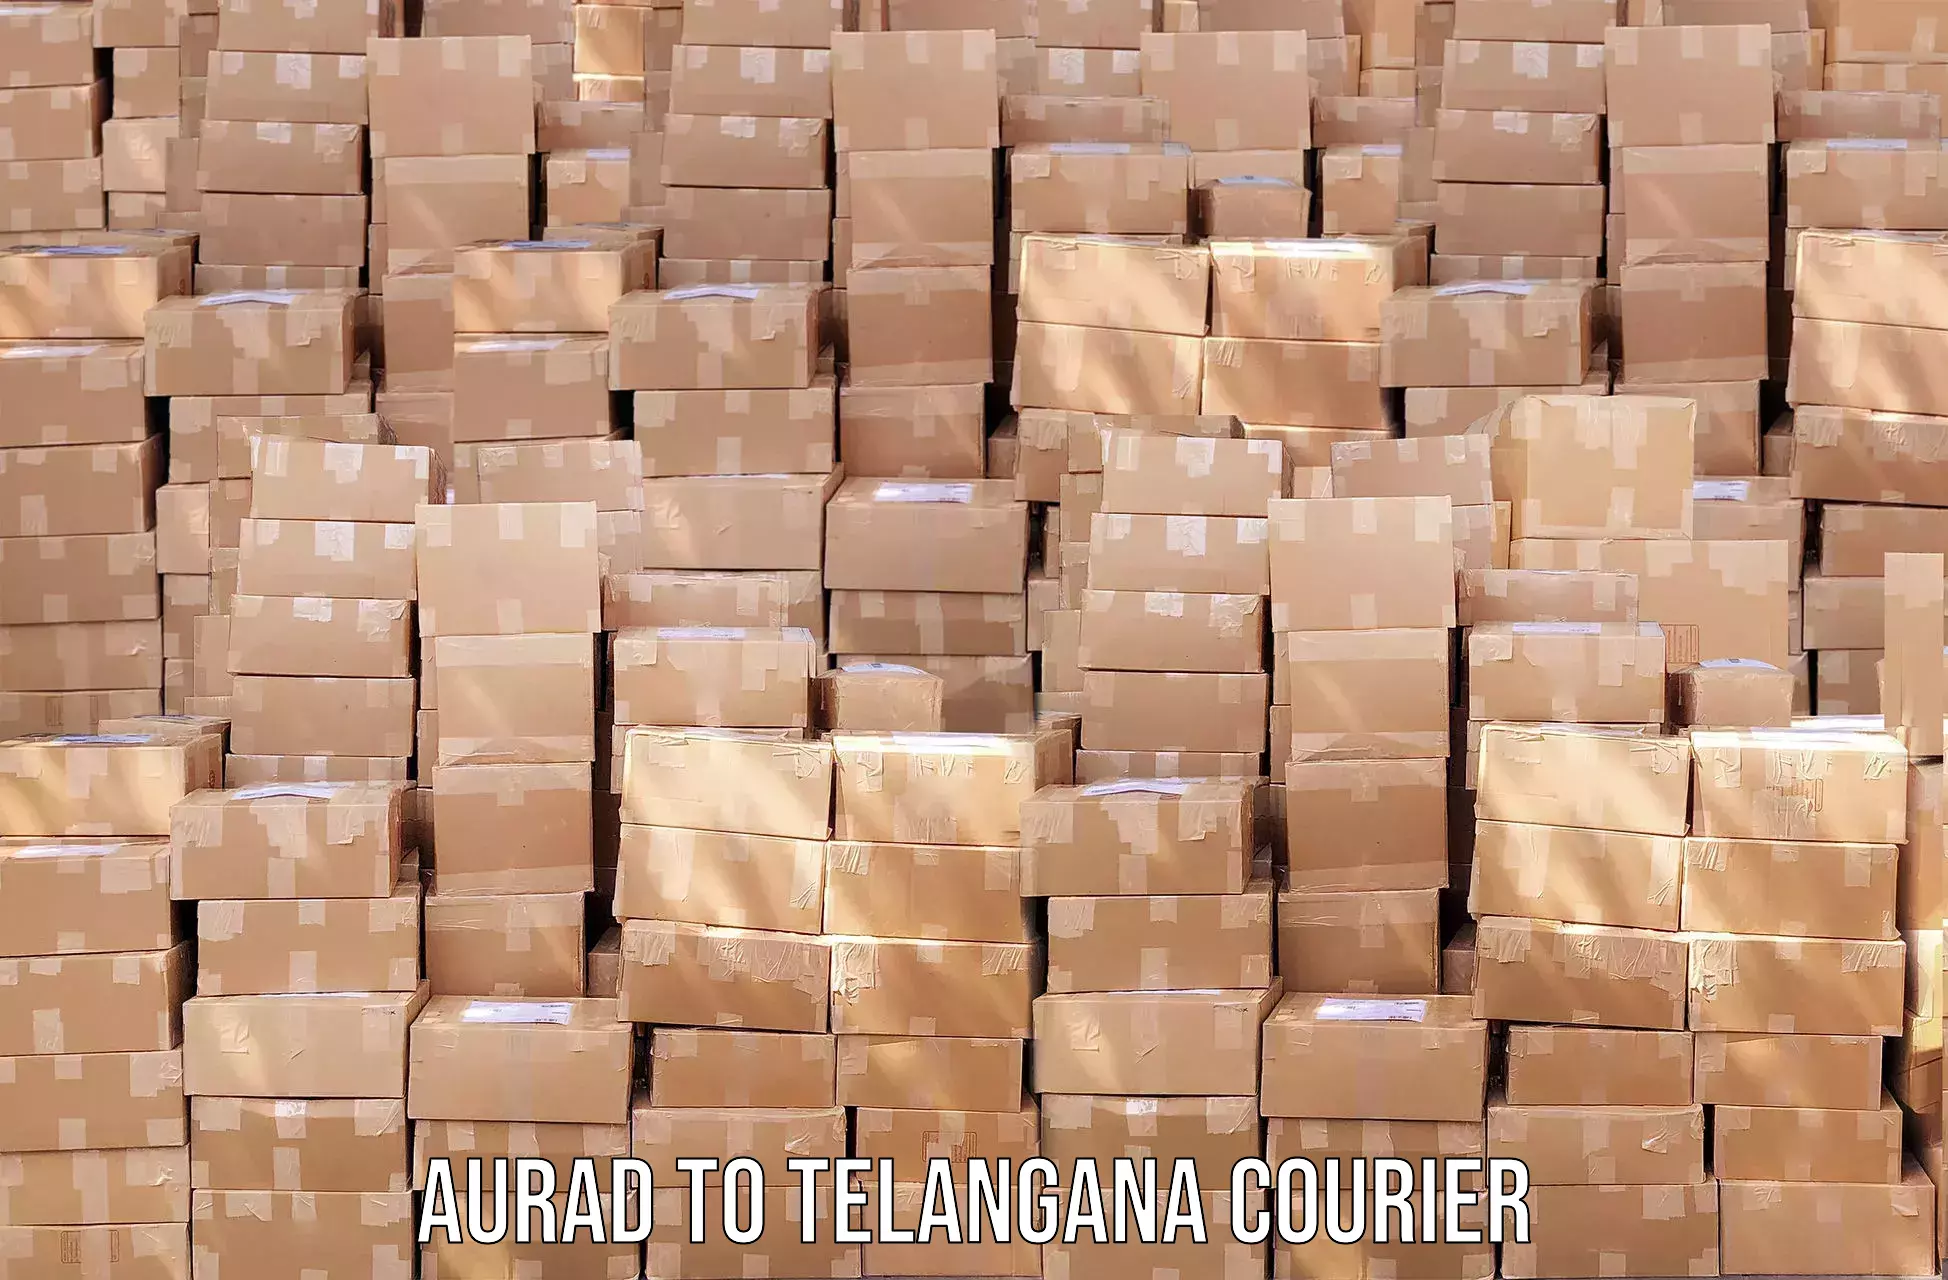 Courier app in Aurad to Telangana